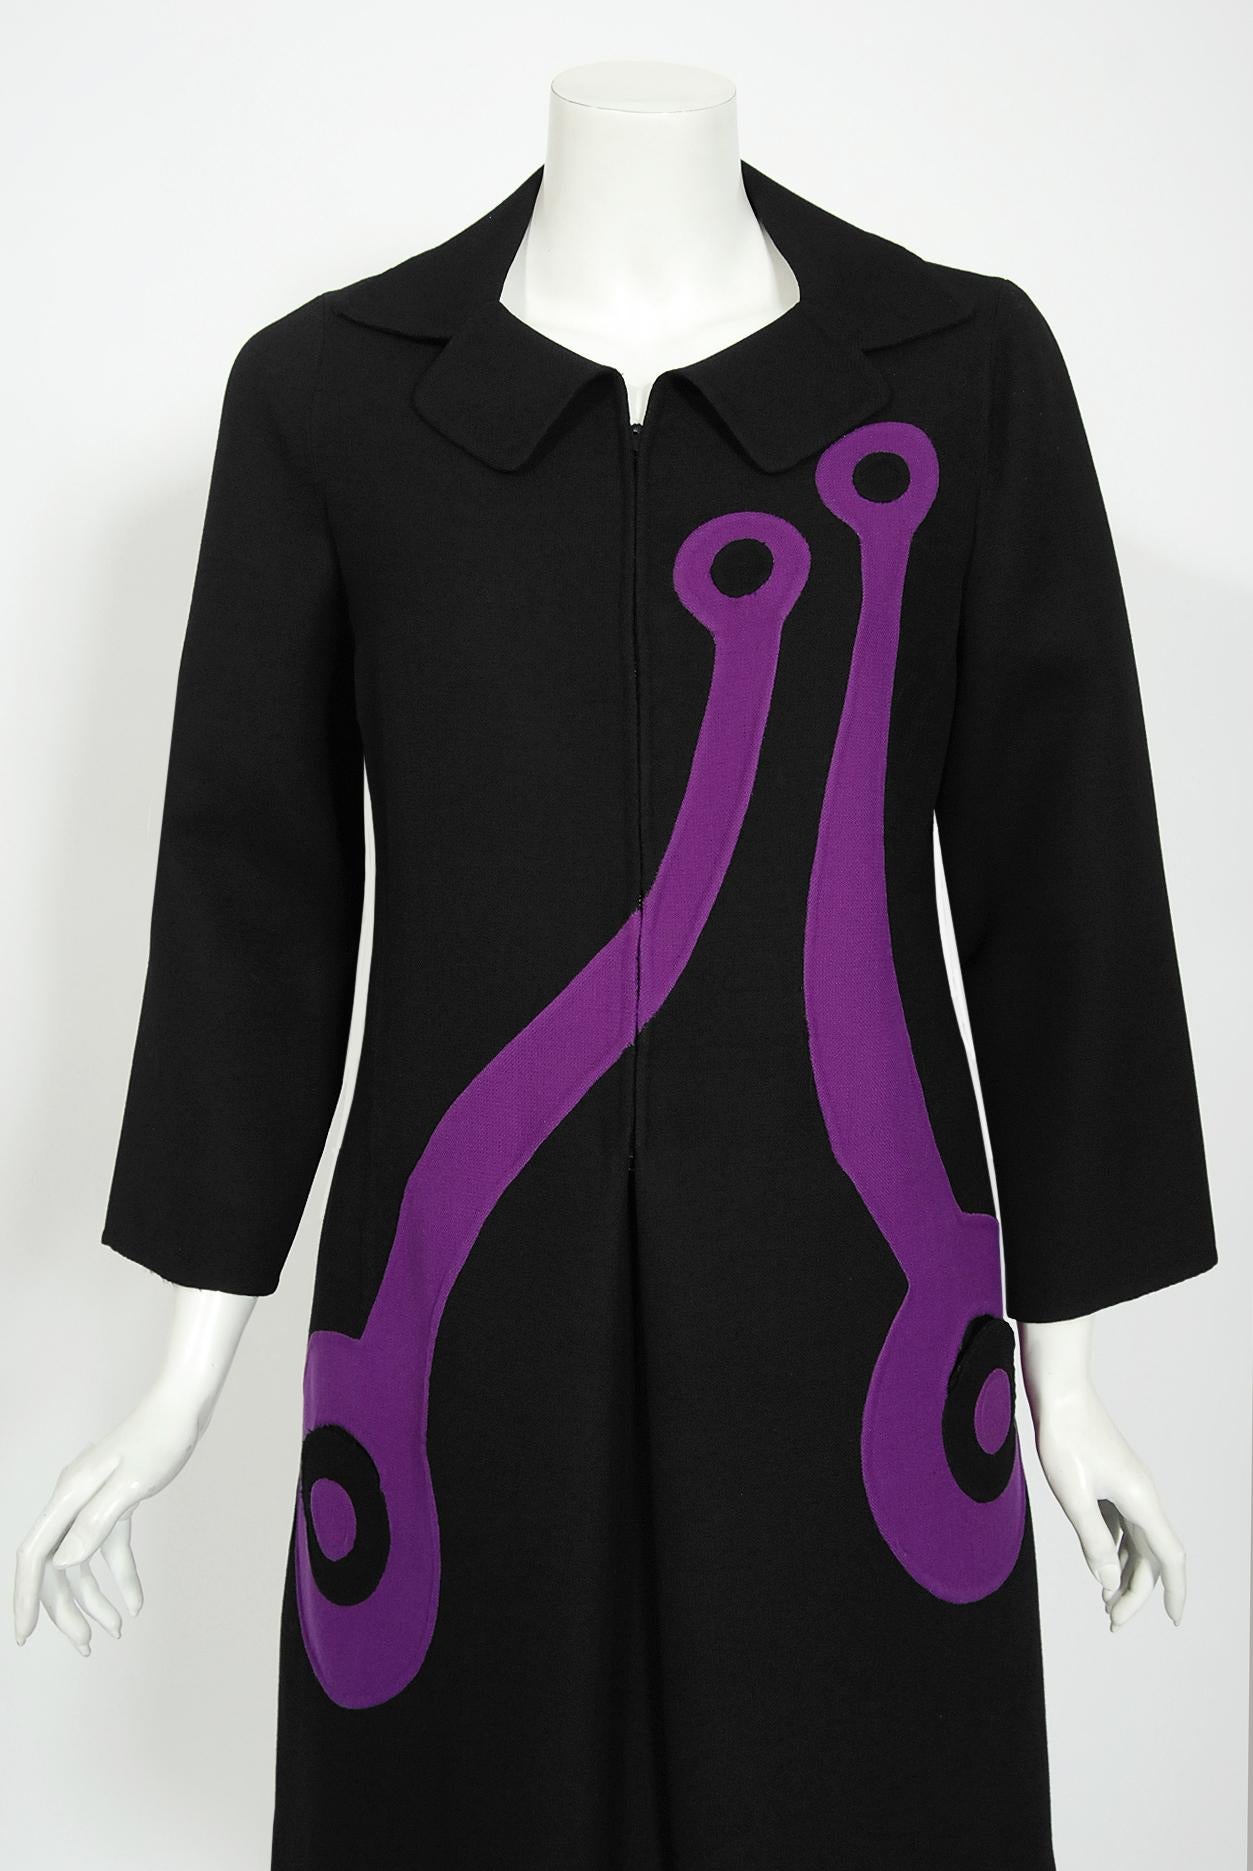 An important and truly stunning Mila Schön Couture black and purple mod coat dress dating back to her 1968-69 fall/winter collection. She was living in Milan with her husband when she decided to enter the world of Italian fashion. This charming and